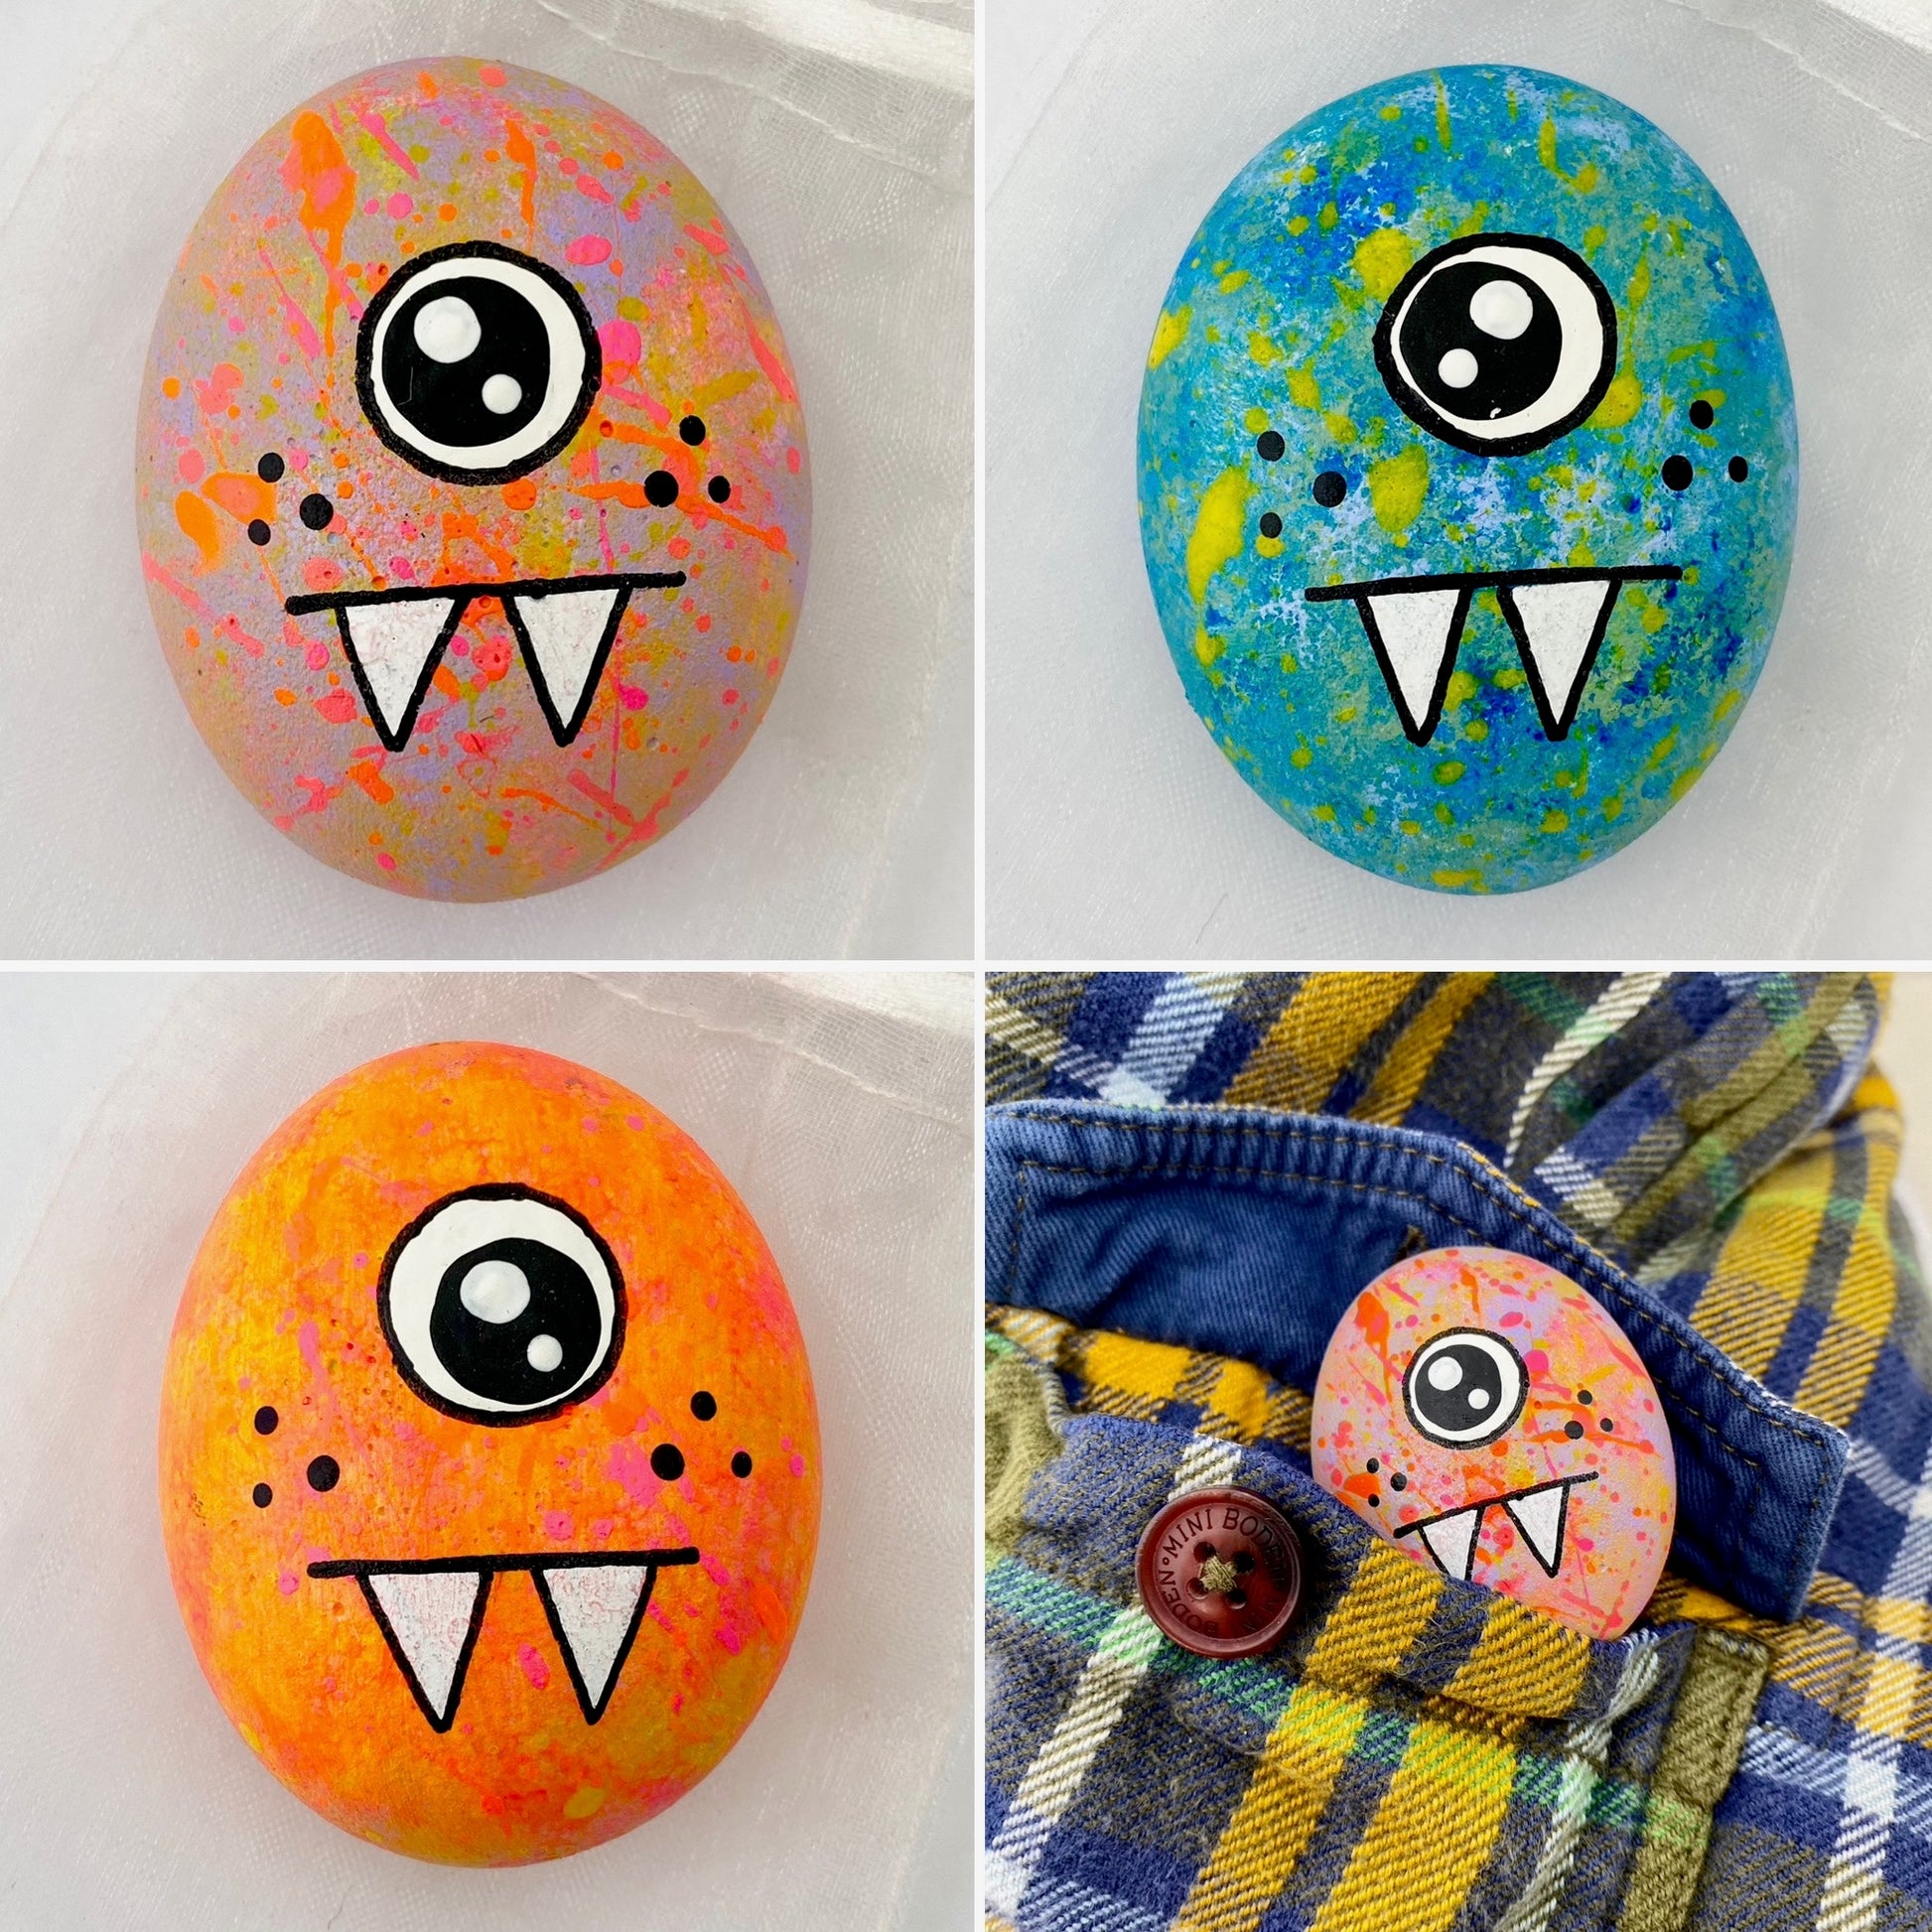 Hand painted 1 eyed monster pebbles called Blerp in 4 different colour ways